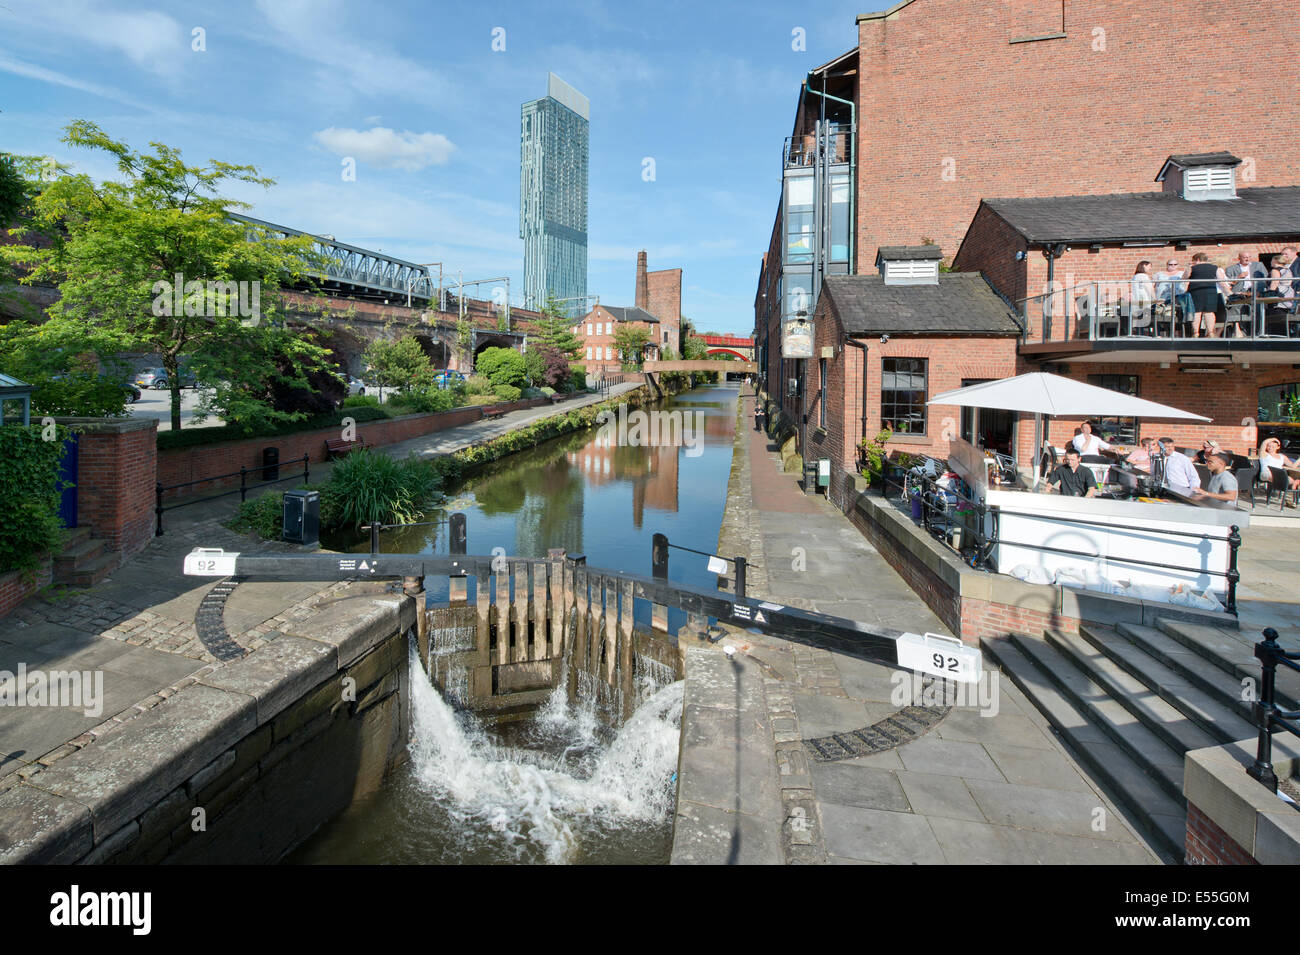 The Castlefield historic inner city canal area including Dukes 92 and lock and Beetham Tower (background) in Manchester UK Stock Photo